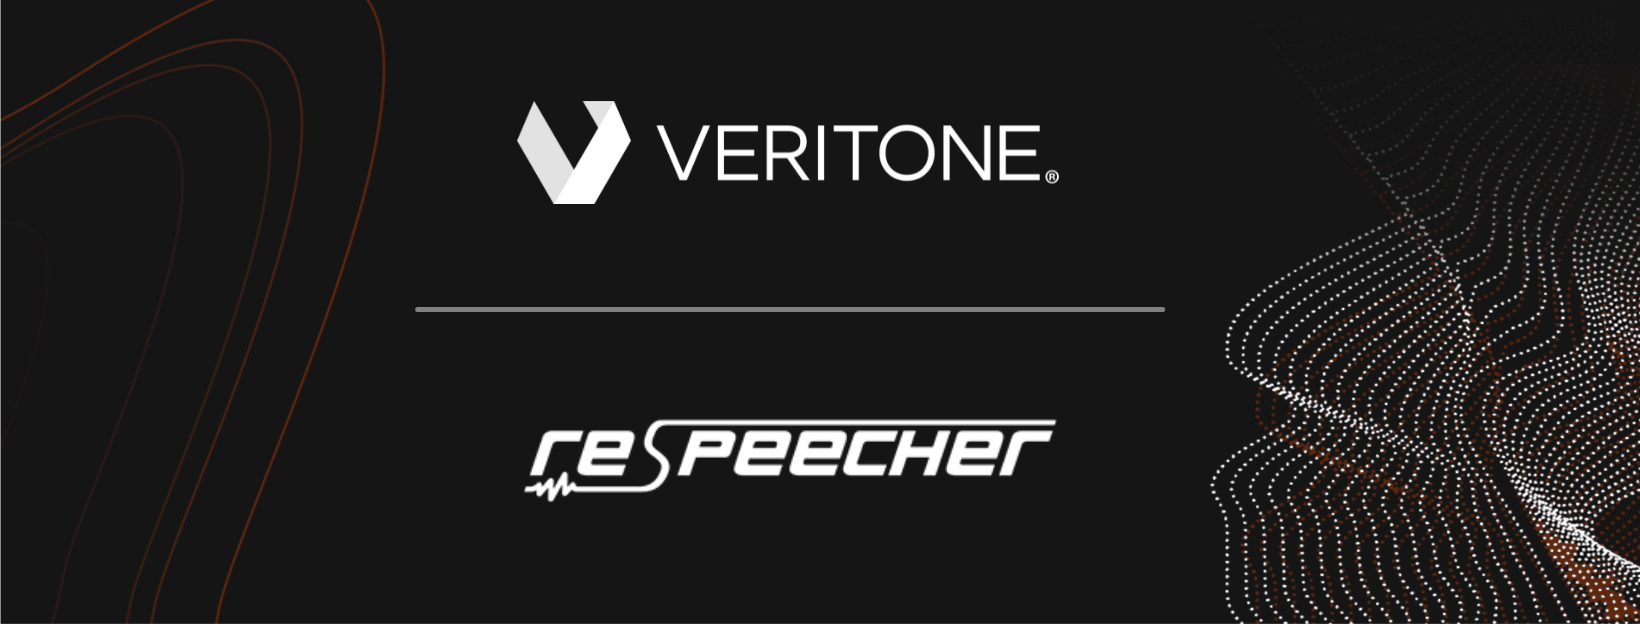 Respeecher Has Partnered with Veritone, a Leader in Enterprise AI, to Deliver Speech-to-Speech Voice Generation to Thousands of Customers